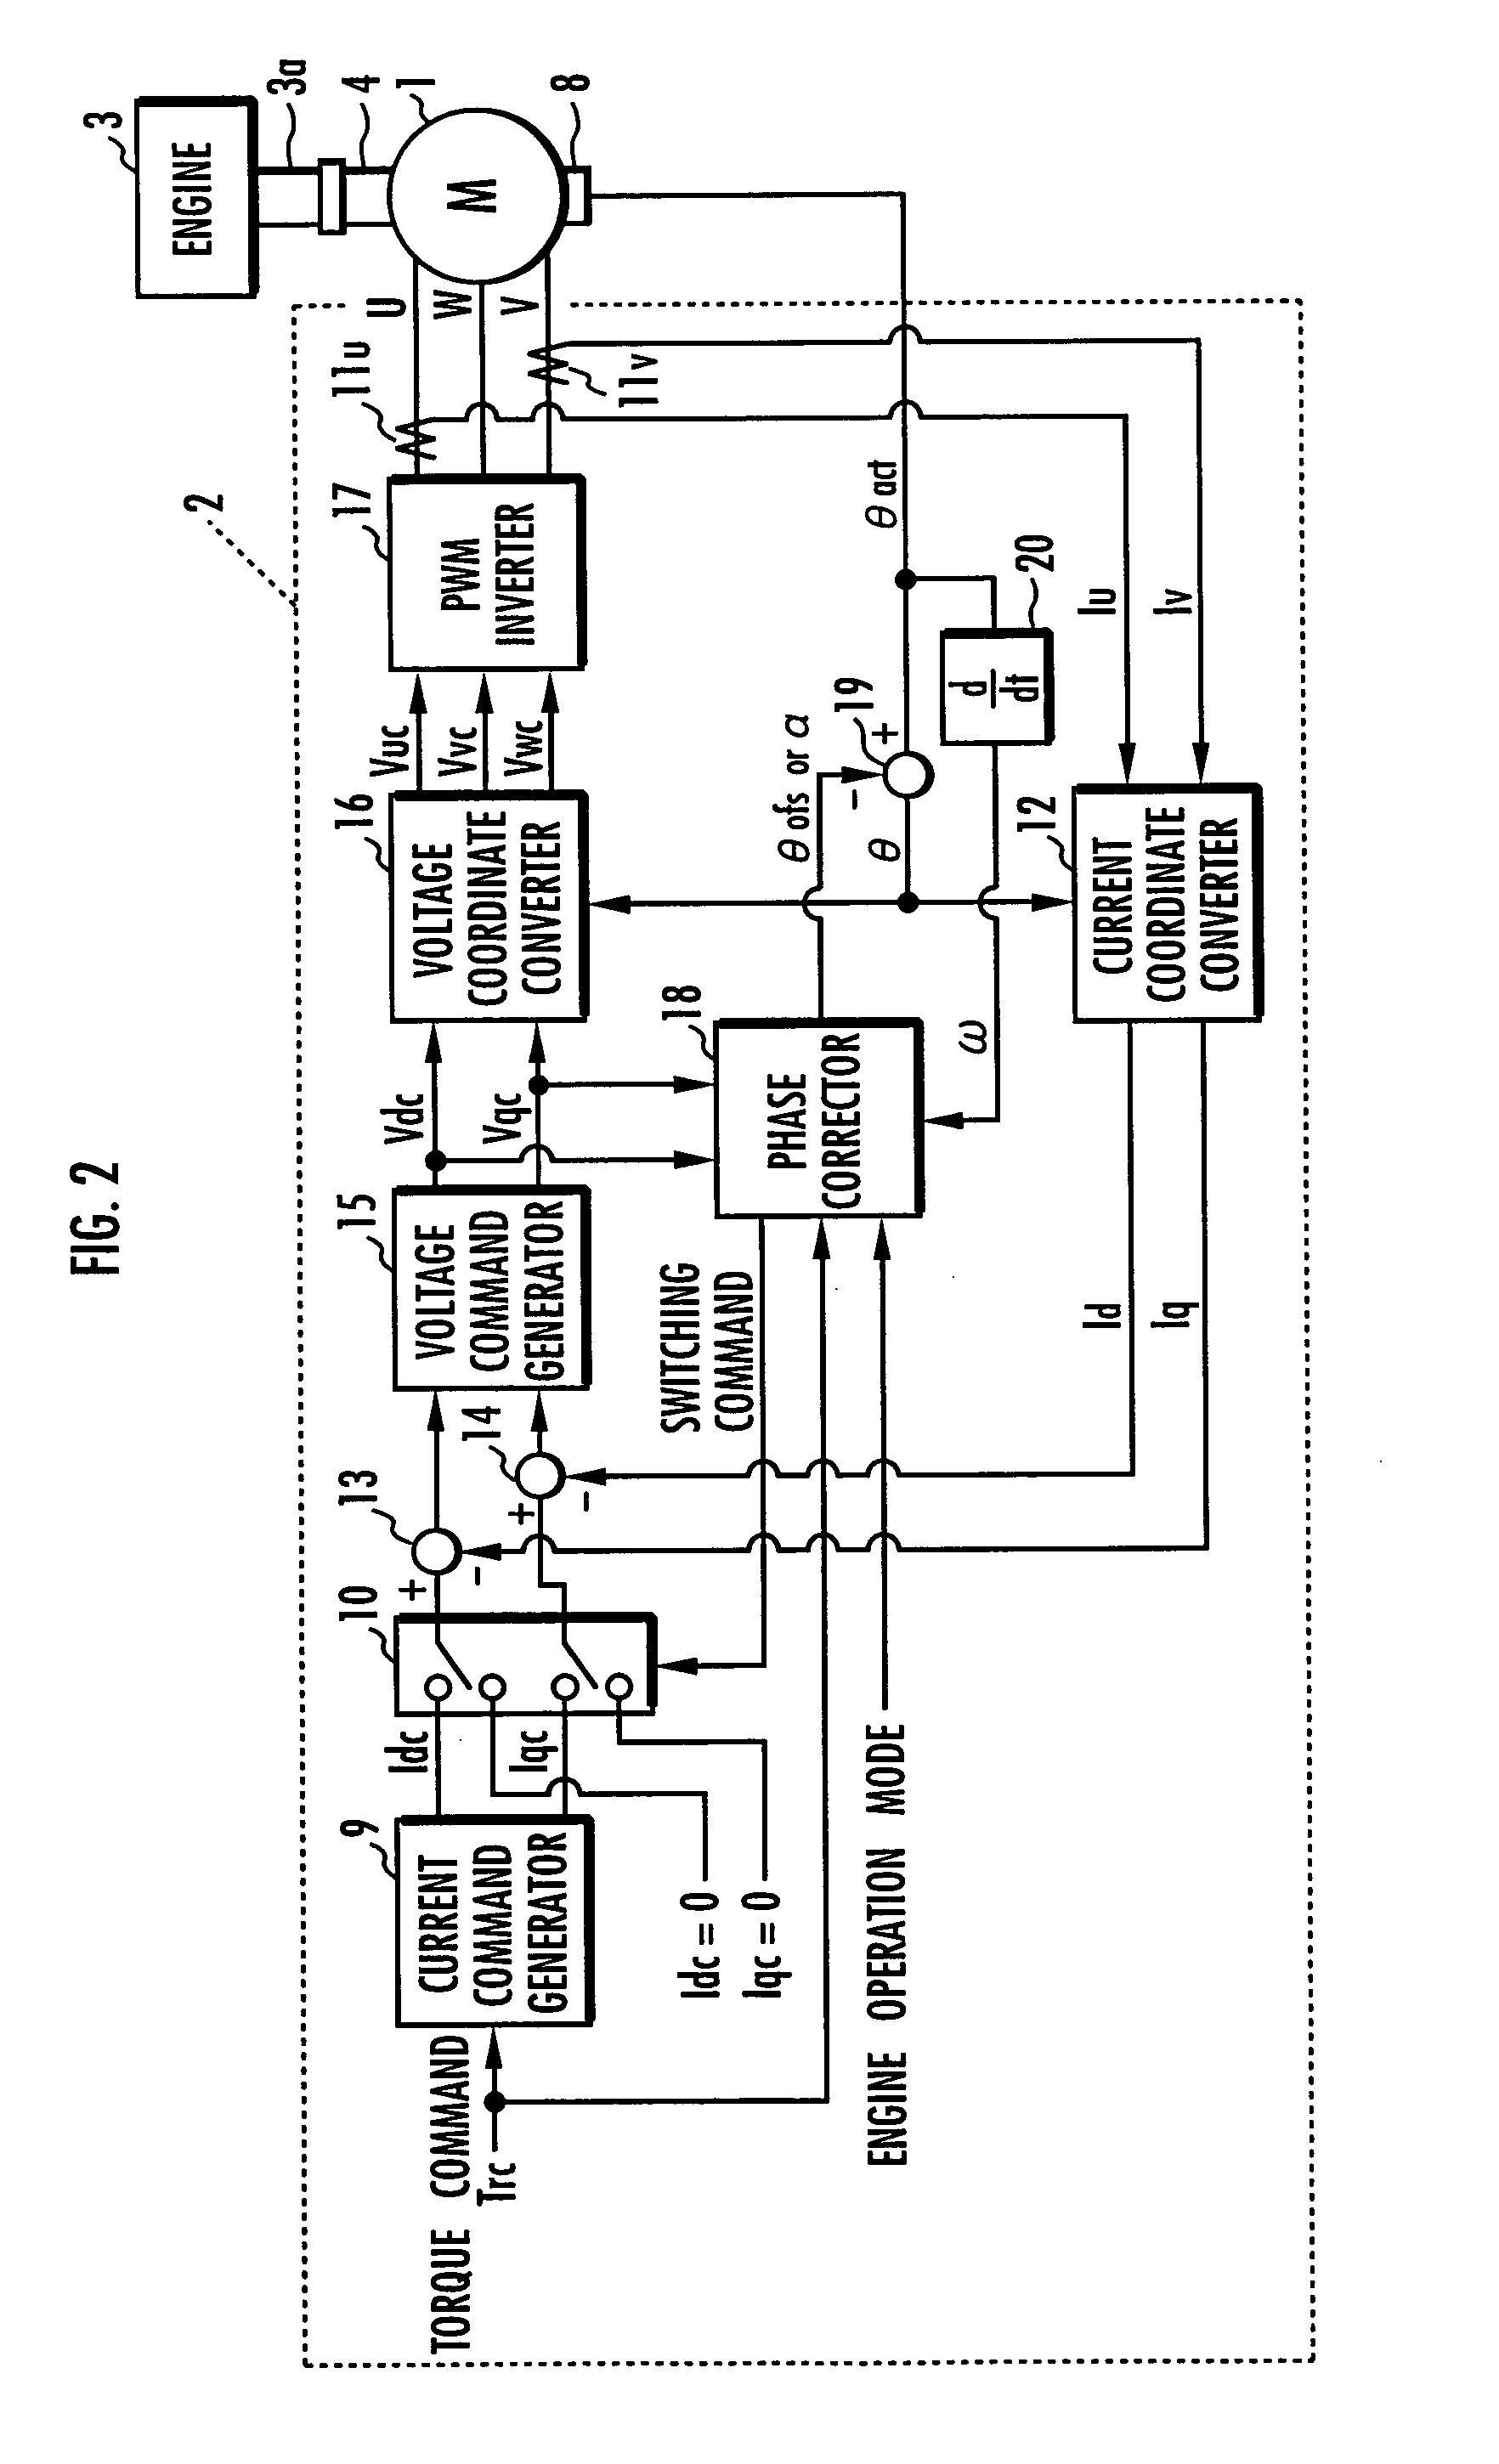 Apparatus for controlling permanent-magnet rotary machine